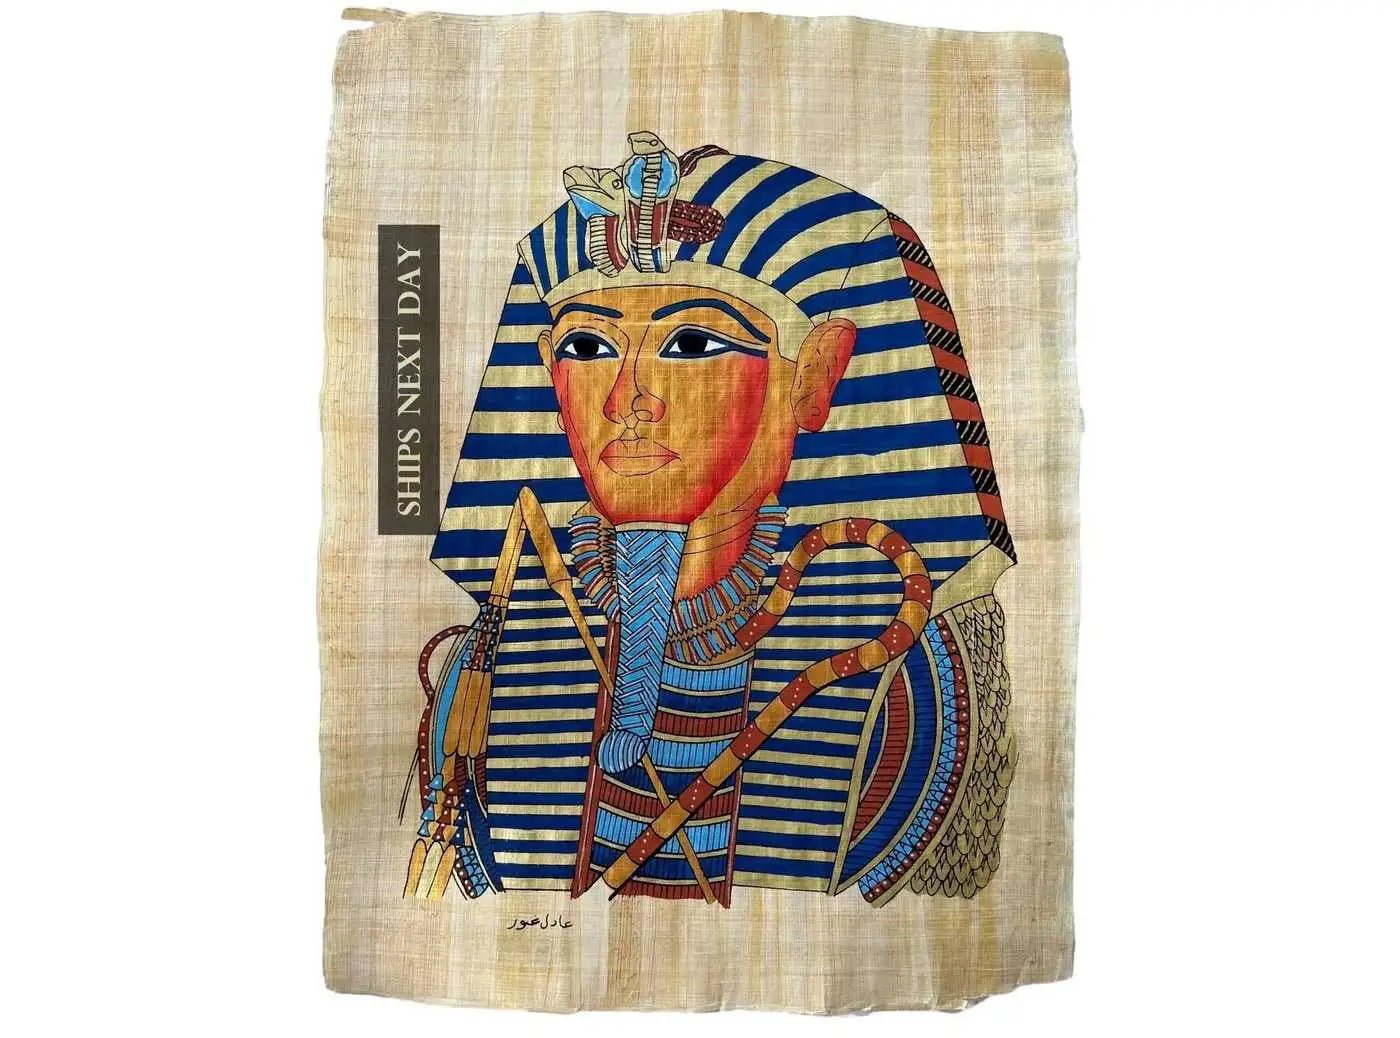 King Tut Tutankhamun - Hand painted In Egypt With Authentic Papyrus Leaves - Egypt Decor